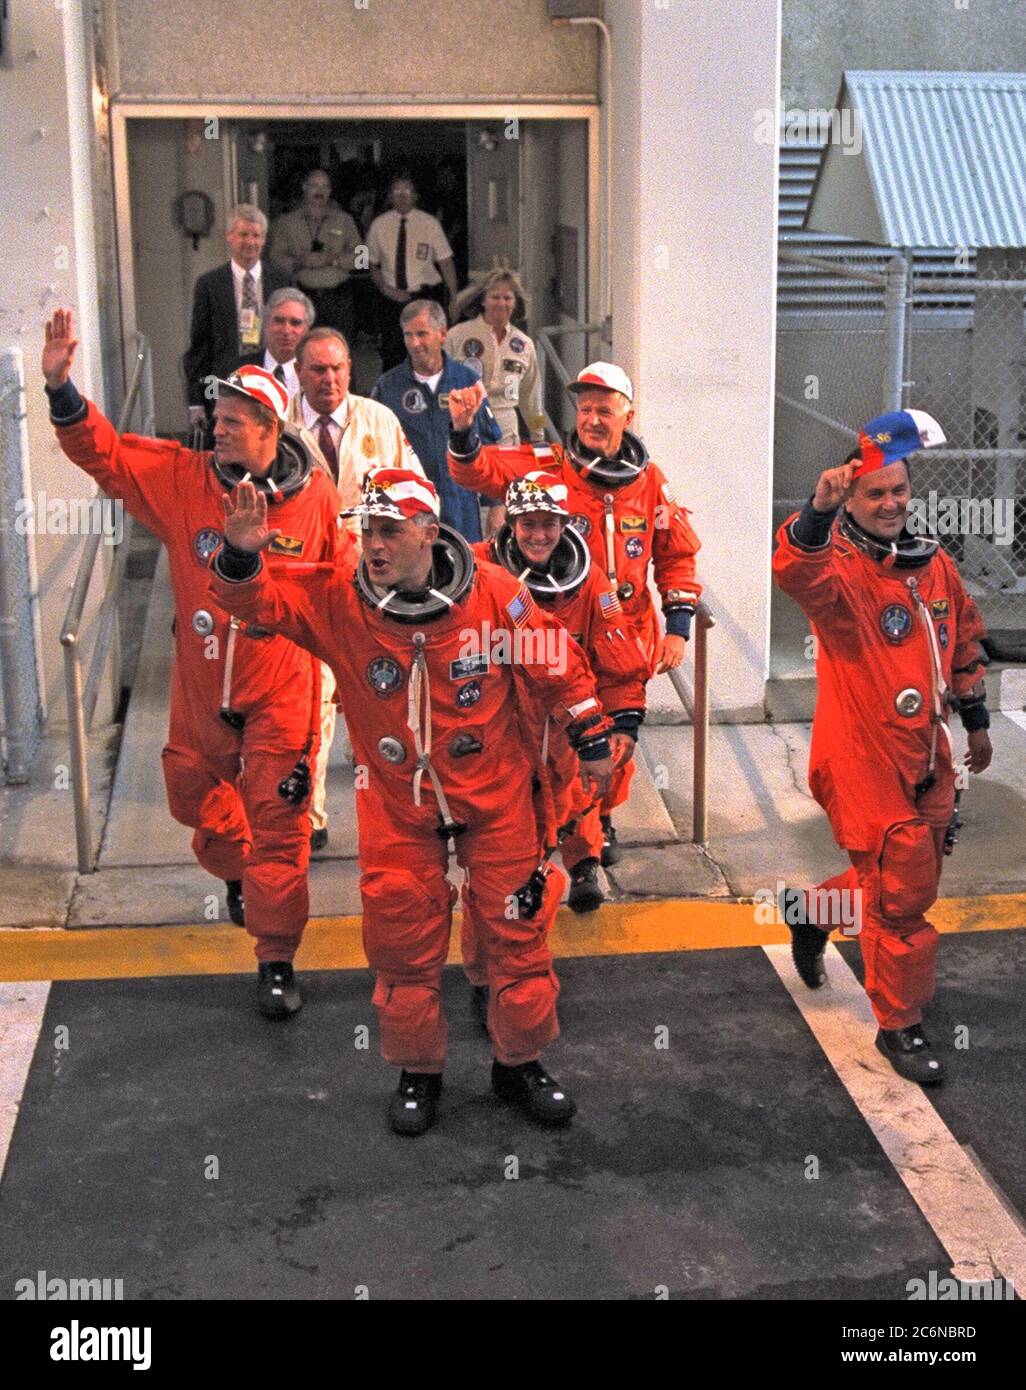 The five STS-86 mission specialists wave to the crowd of press representatives, KSC employees and other well-wishers as they depart from the Operations and Checkout Building. The three U.S. mission specialists (and their nicknames for this flight) are, from left, 'too tall' Scott E. Parazynski, 'just right' David A. Wolf and 'too short' Wendy B. Lawrence. The two mission specialists representing foreign space agencies are Vladimir Georgievich Titov of the Russian Space Agency, in foreground at right, and Jean-Loup J.M. Chretien of the French Space Agency, CNES, in background at right. Commande Stock Photo